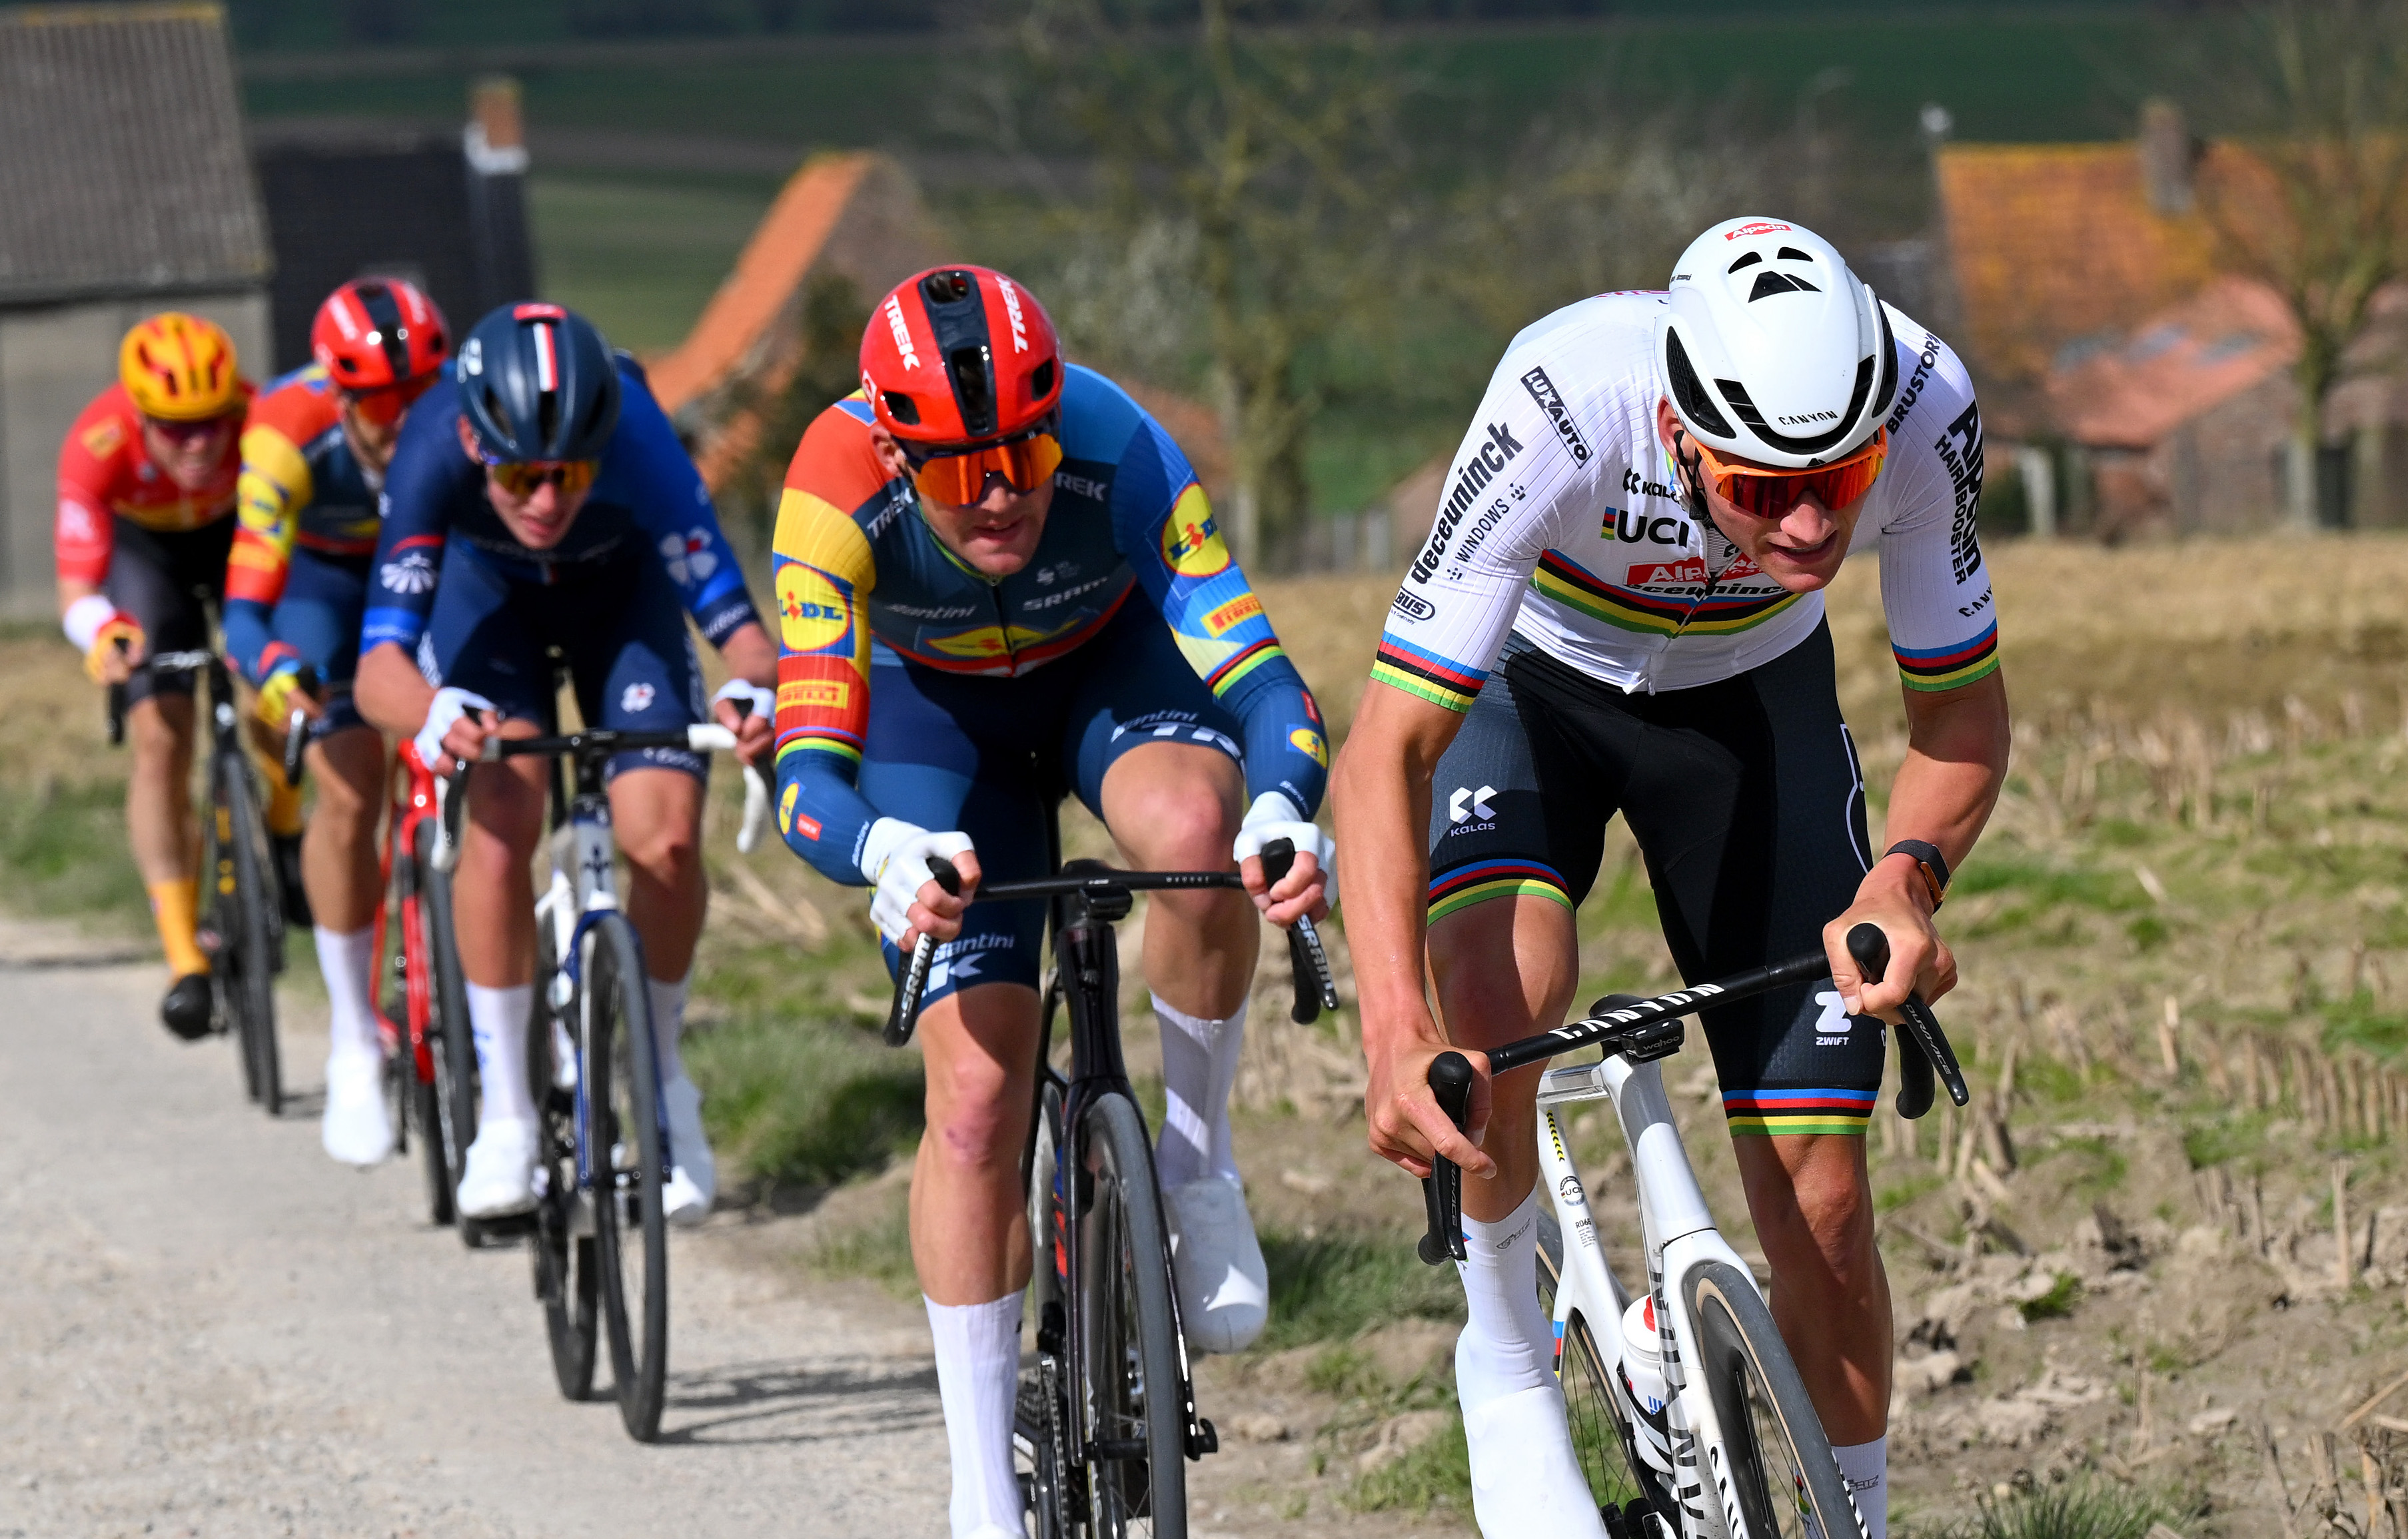 Mathieu van der Poel in a world of his own as Tour of Flanders favourite